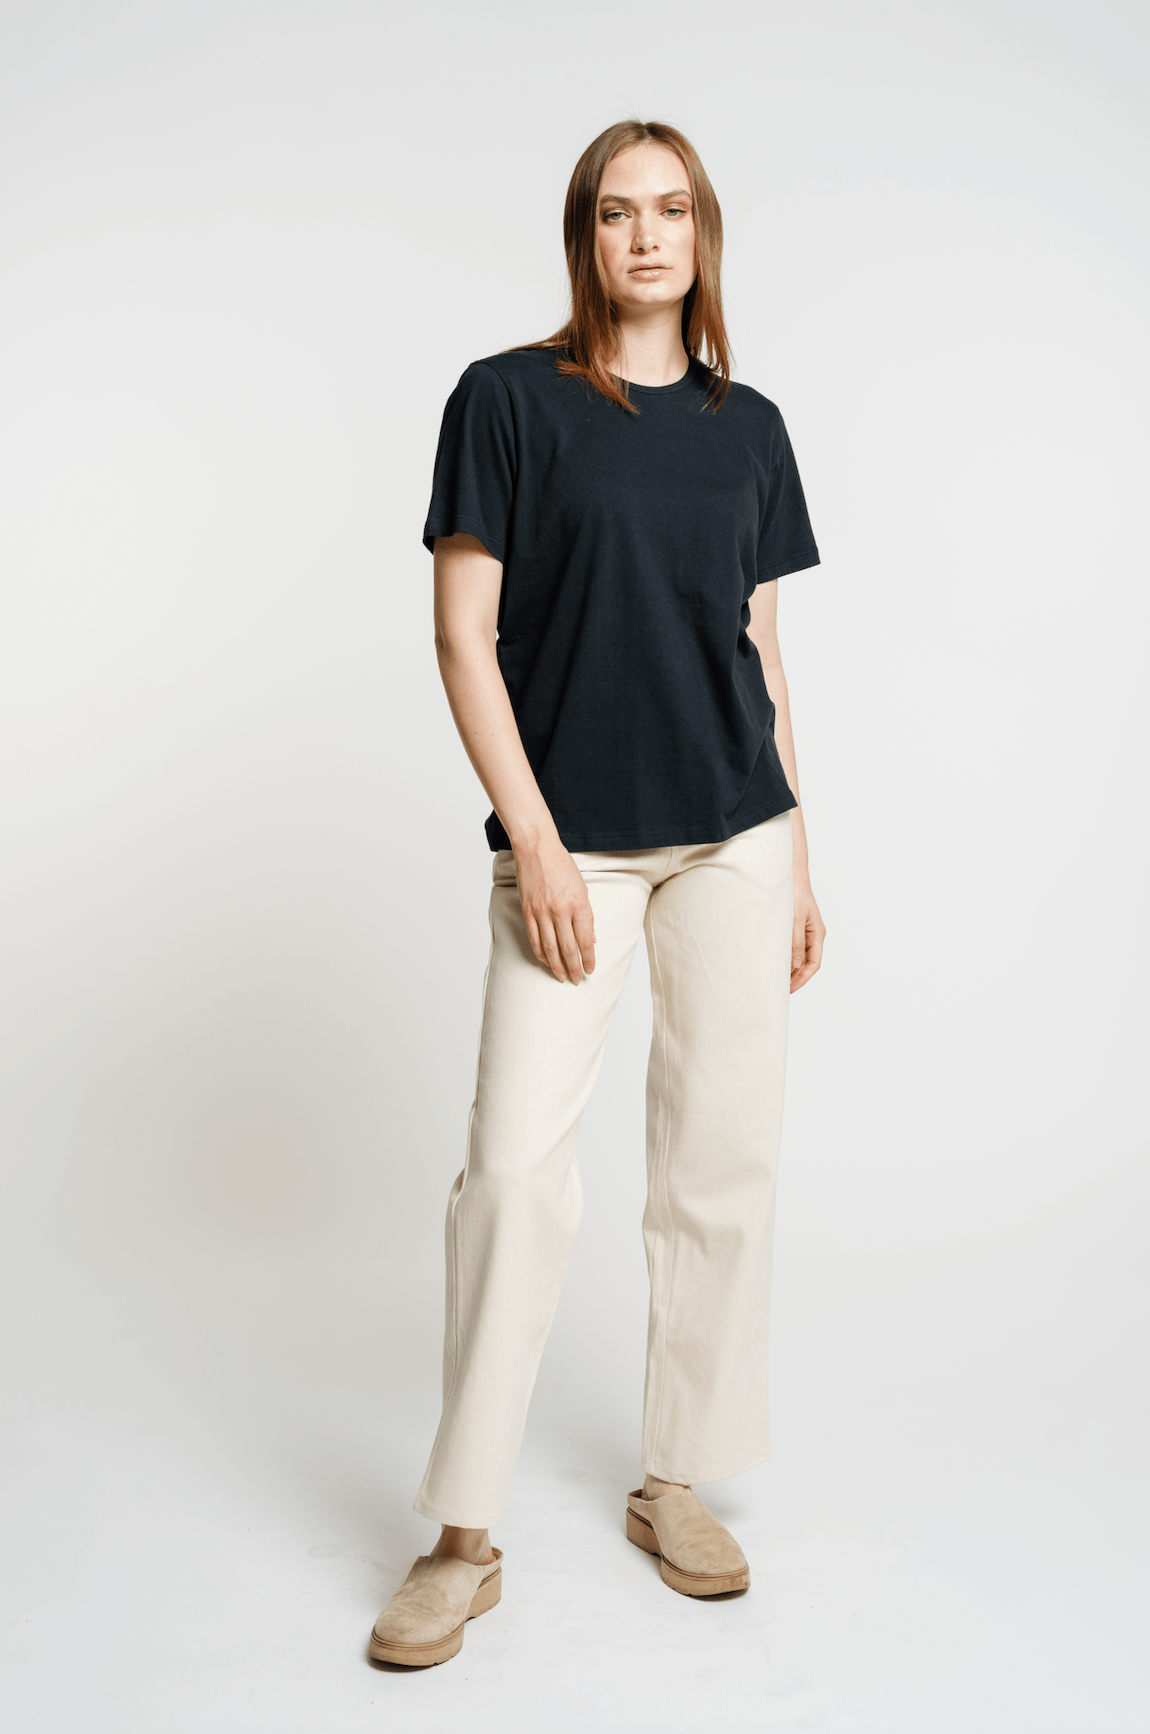 The model is wearing a sustainable Crewneck T-Shirt in black and organic cotton pants in beige.